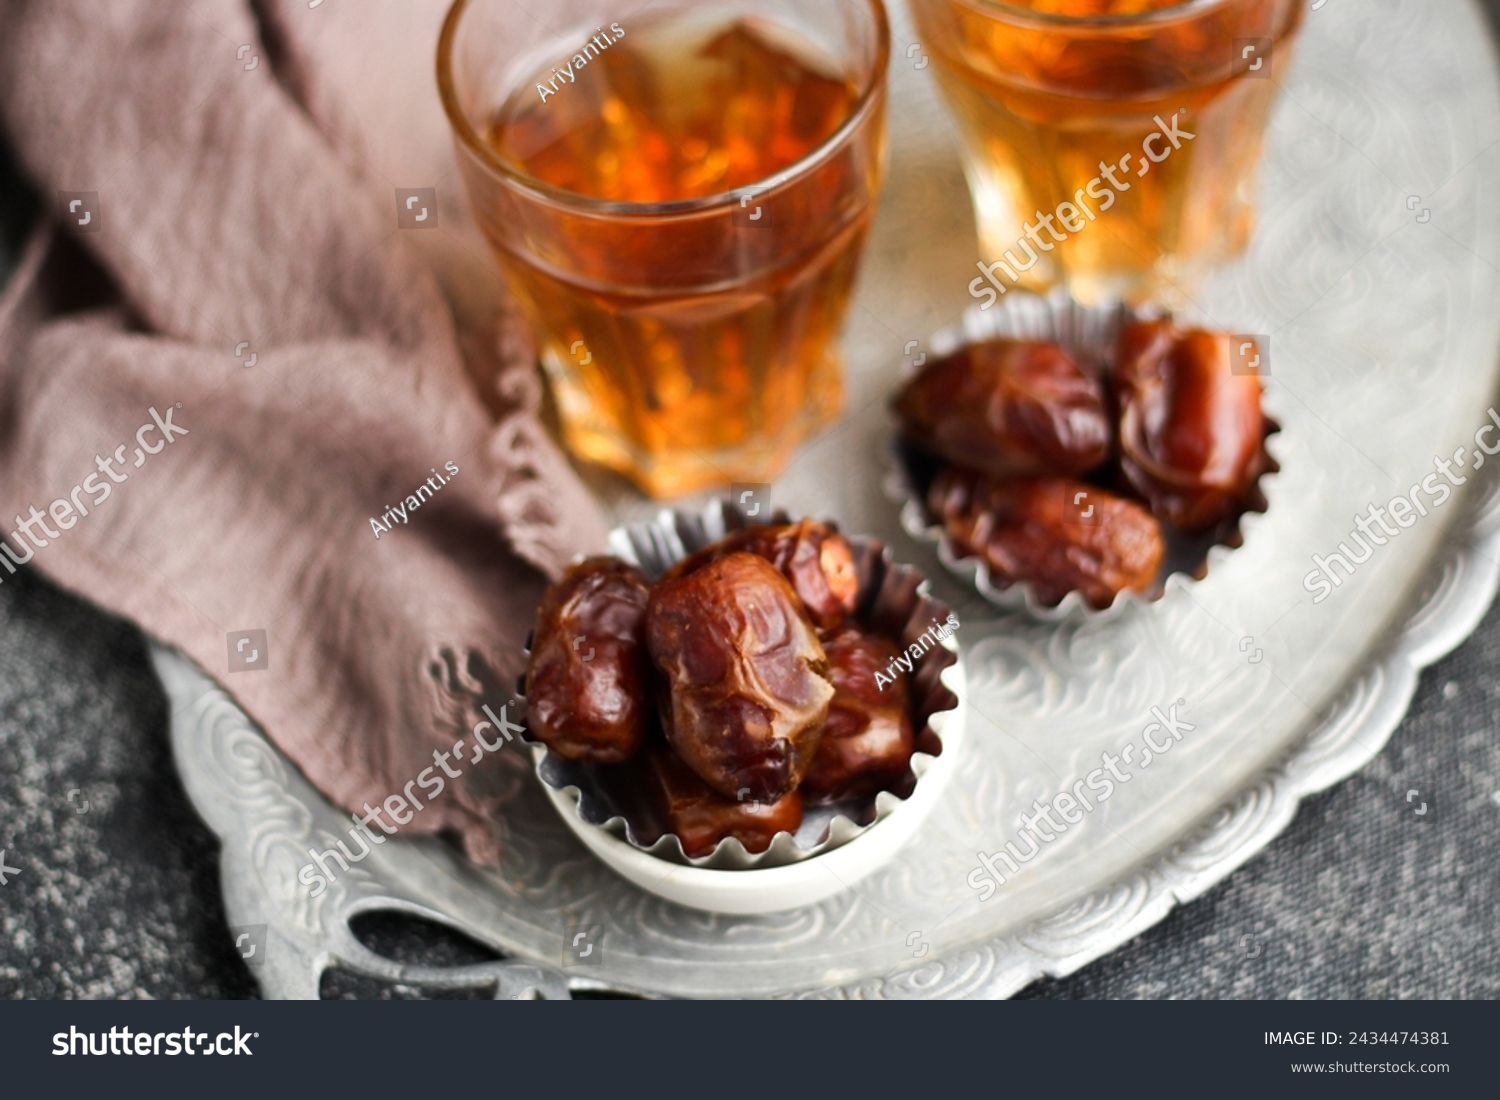 Dates or dried dates and hot tea on silver tray.  #2434474381